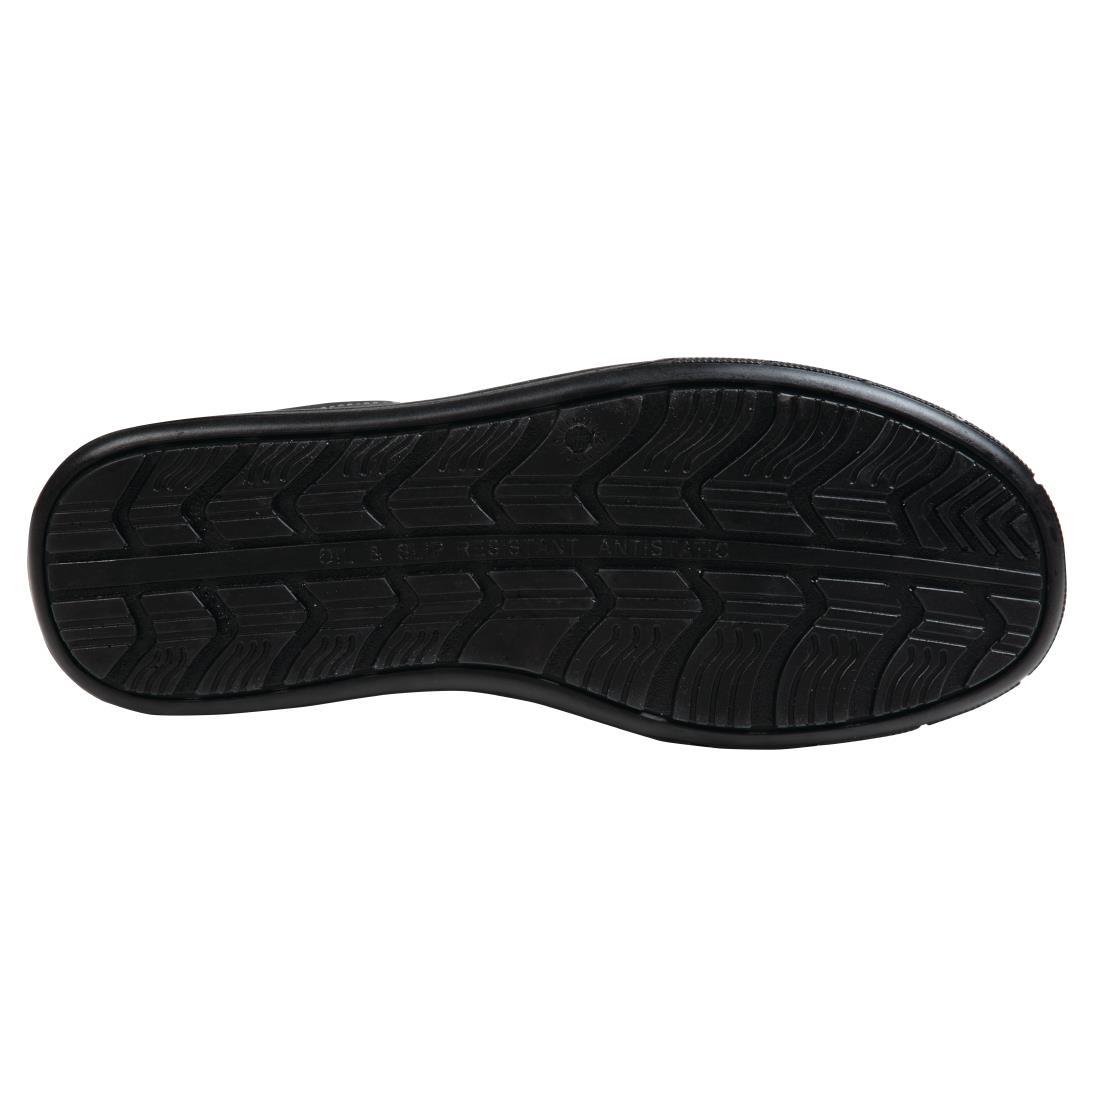 Slipbuster Safety Trainers Black 39 - BB420-39  - 2